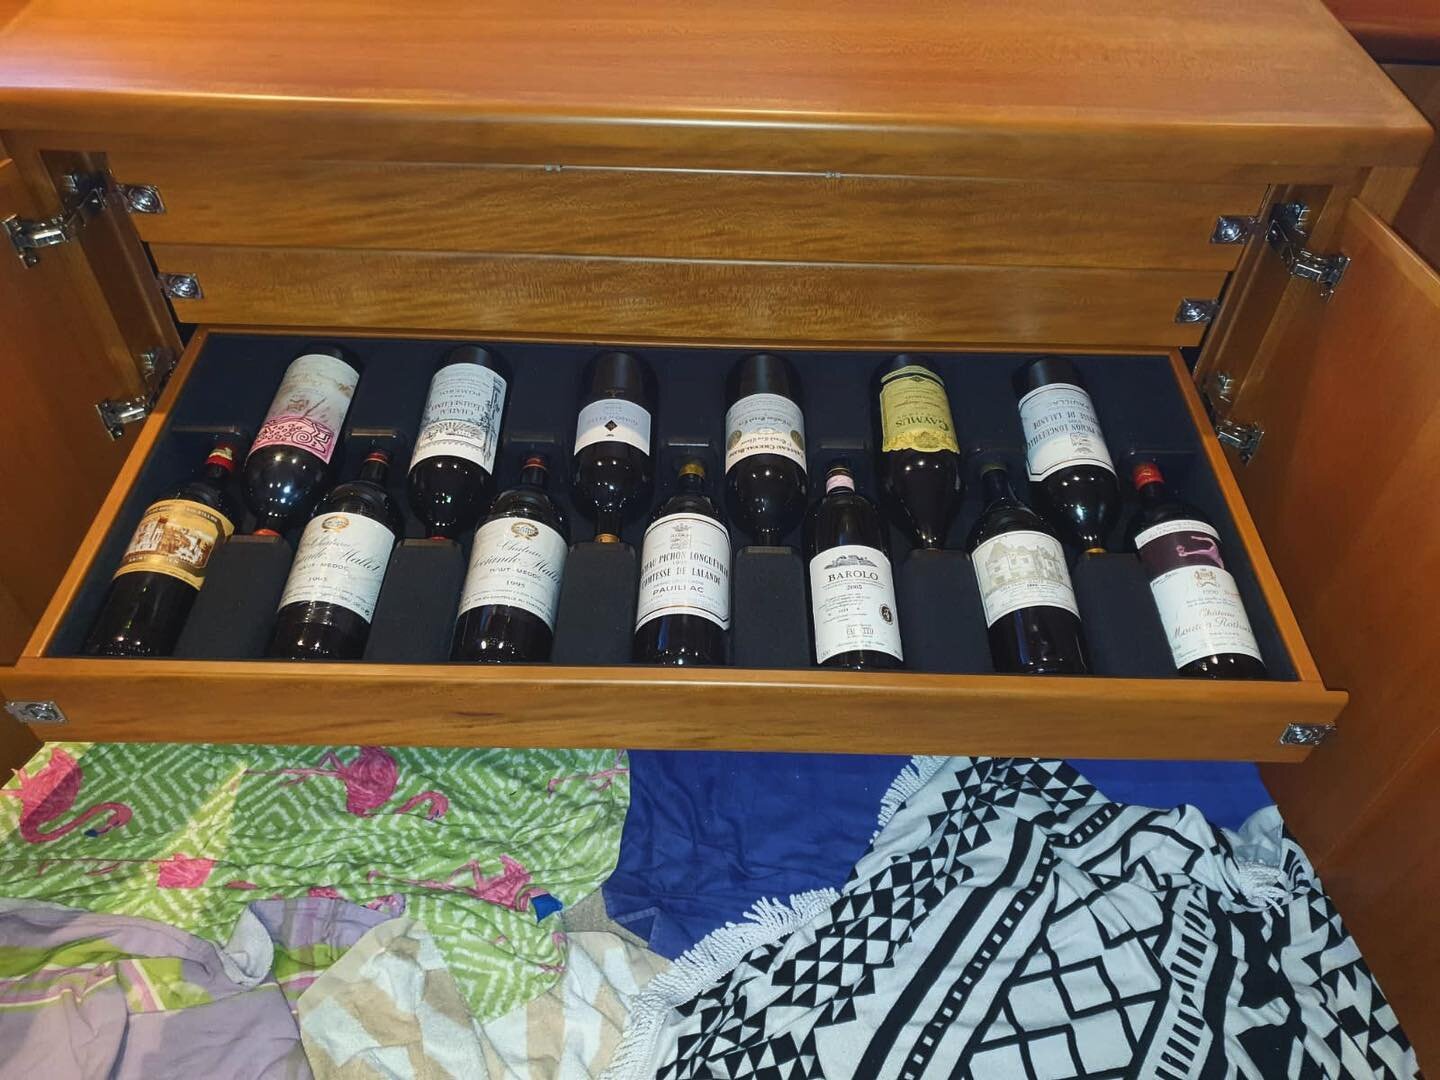 #wineamoraz fully stocked and ready for a crossing.  Thanks for the pic cap&rsquo;n #yacht #wine #woodworking